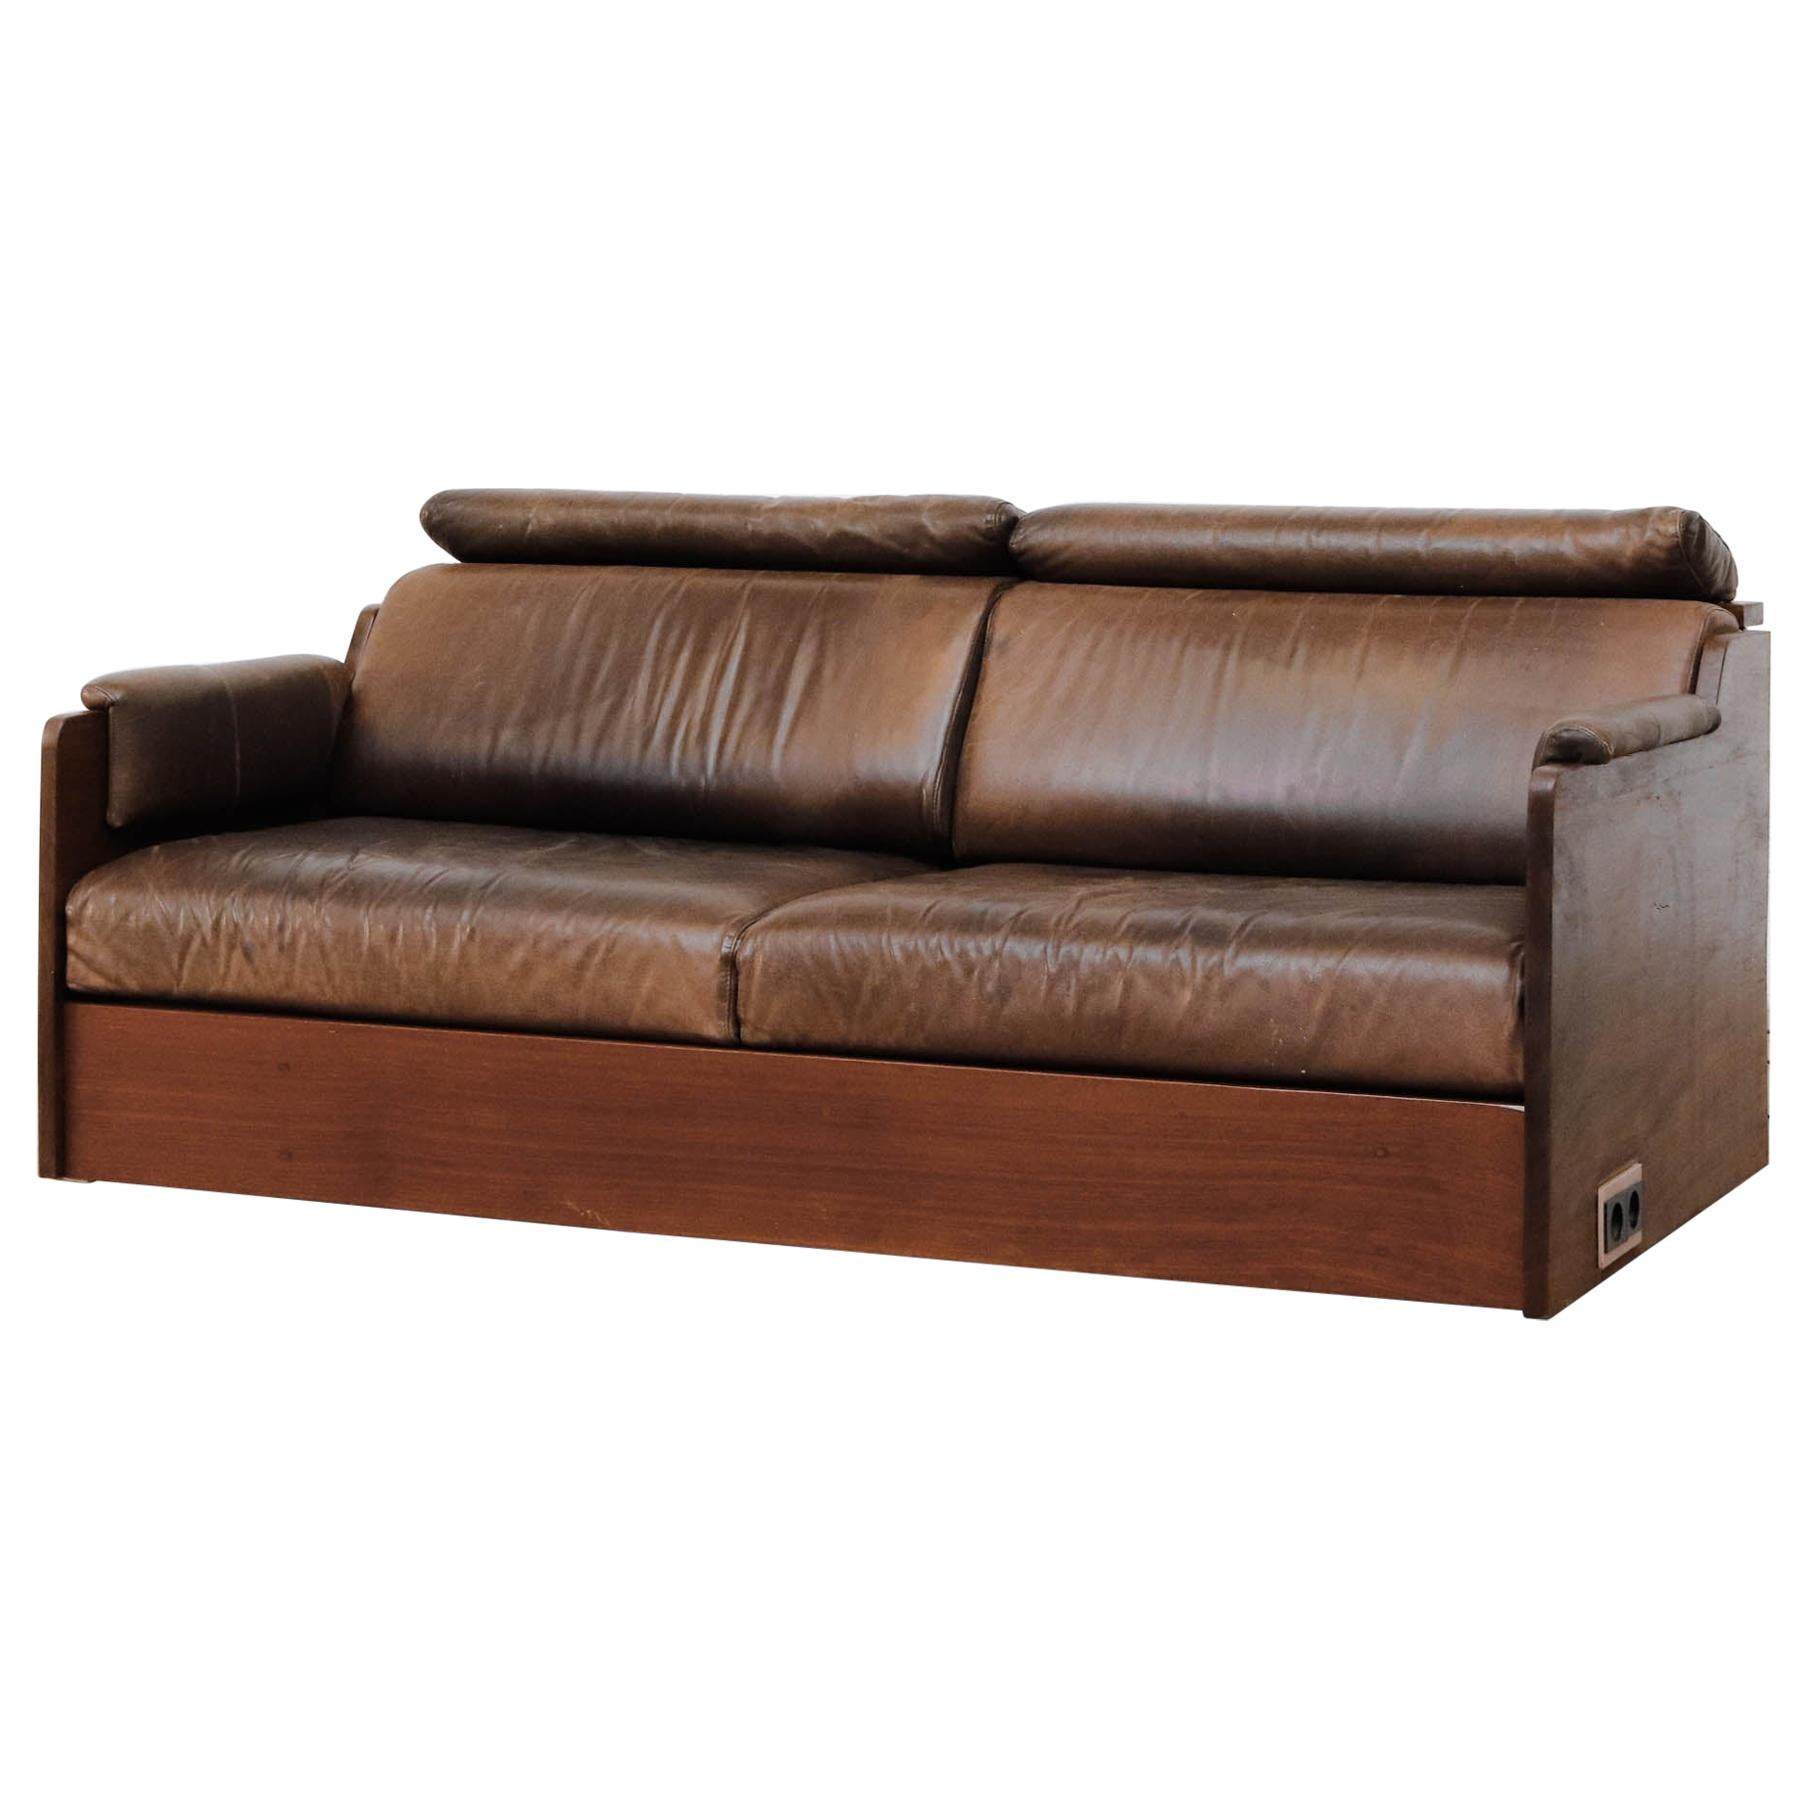 Ate van Apeldoorn Custom Solid Iroko Loveseat with Brown Leather and Outlet For Sale